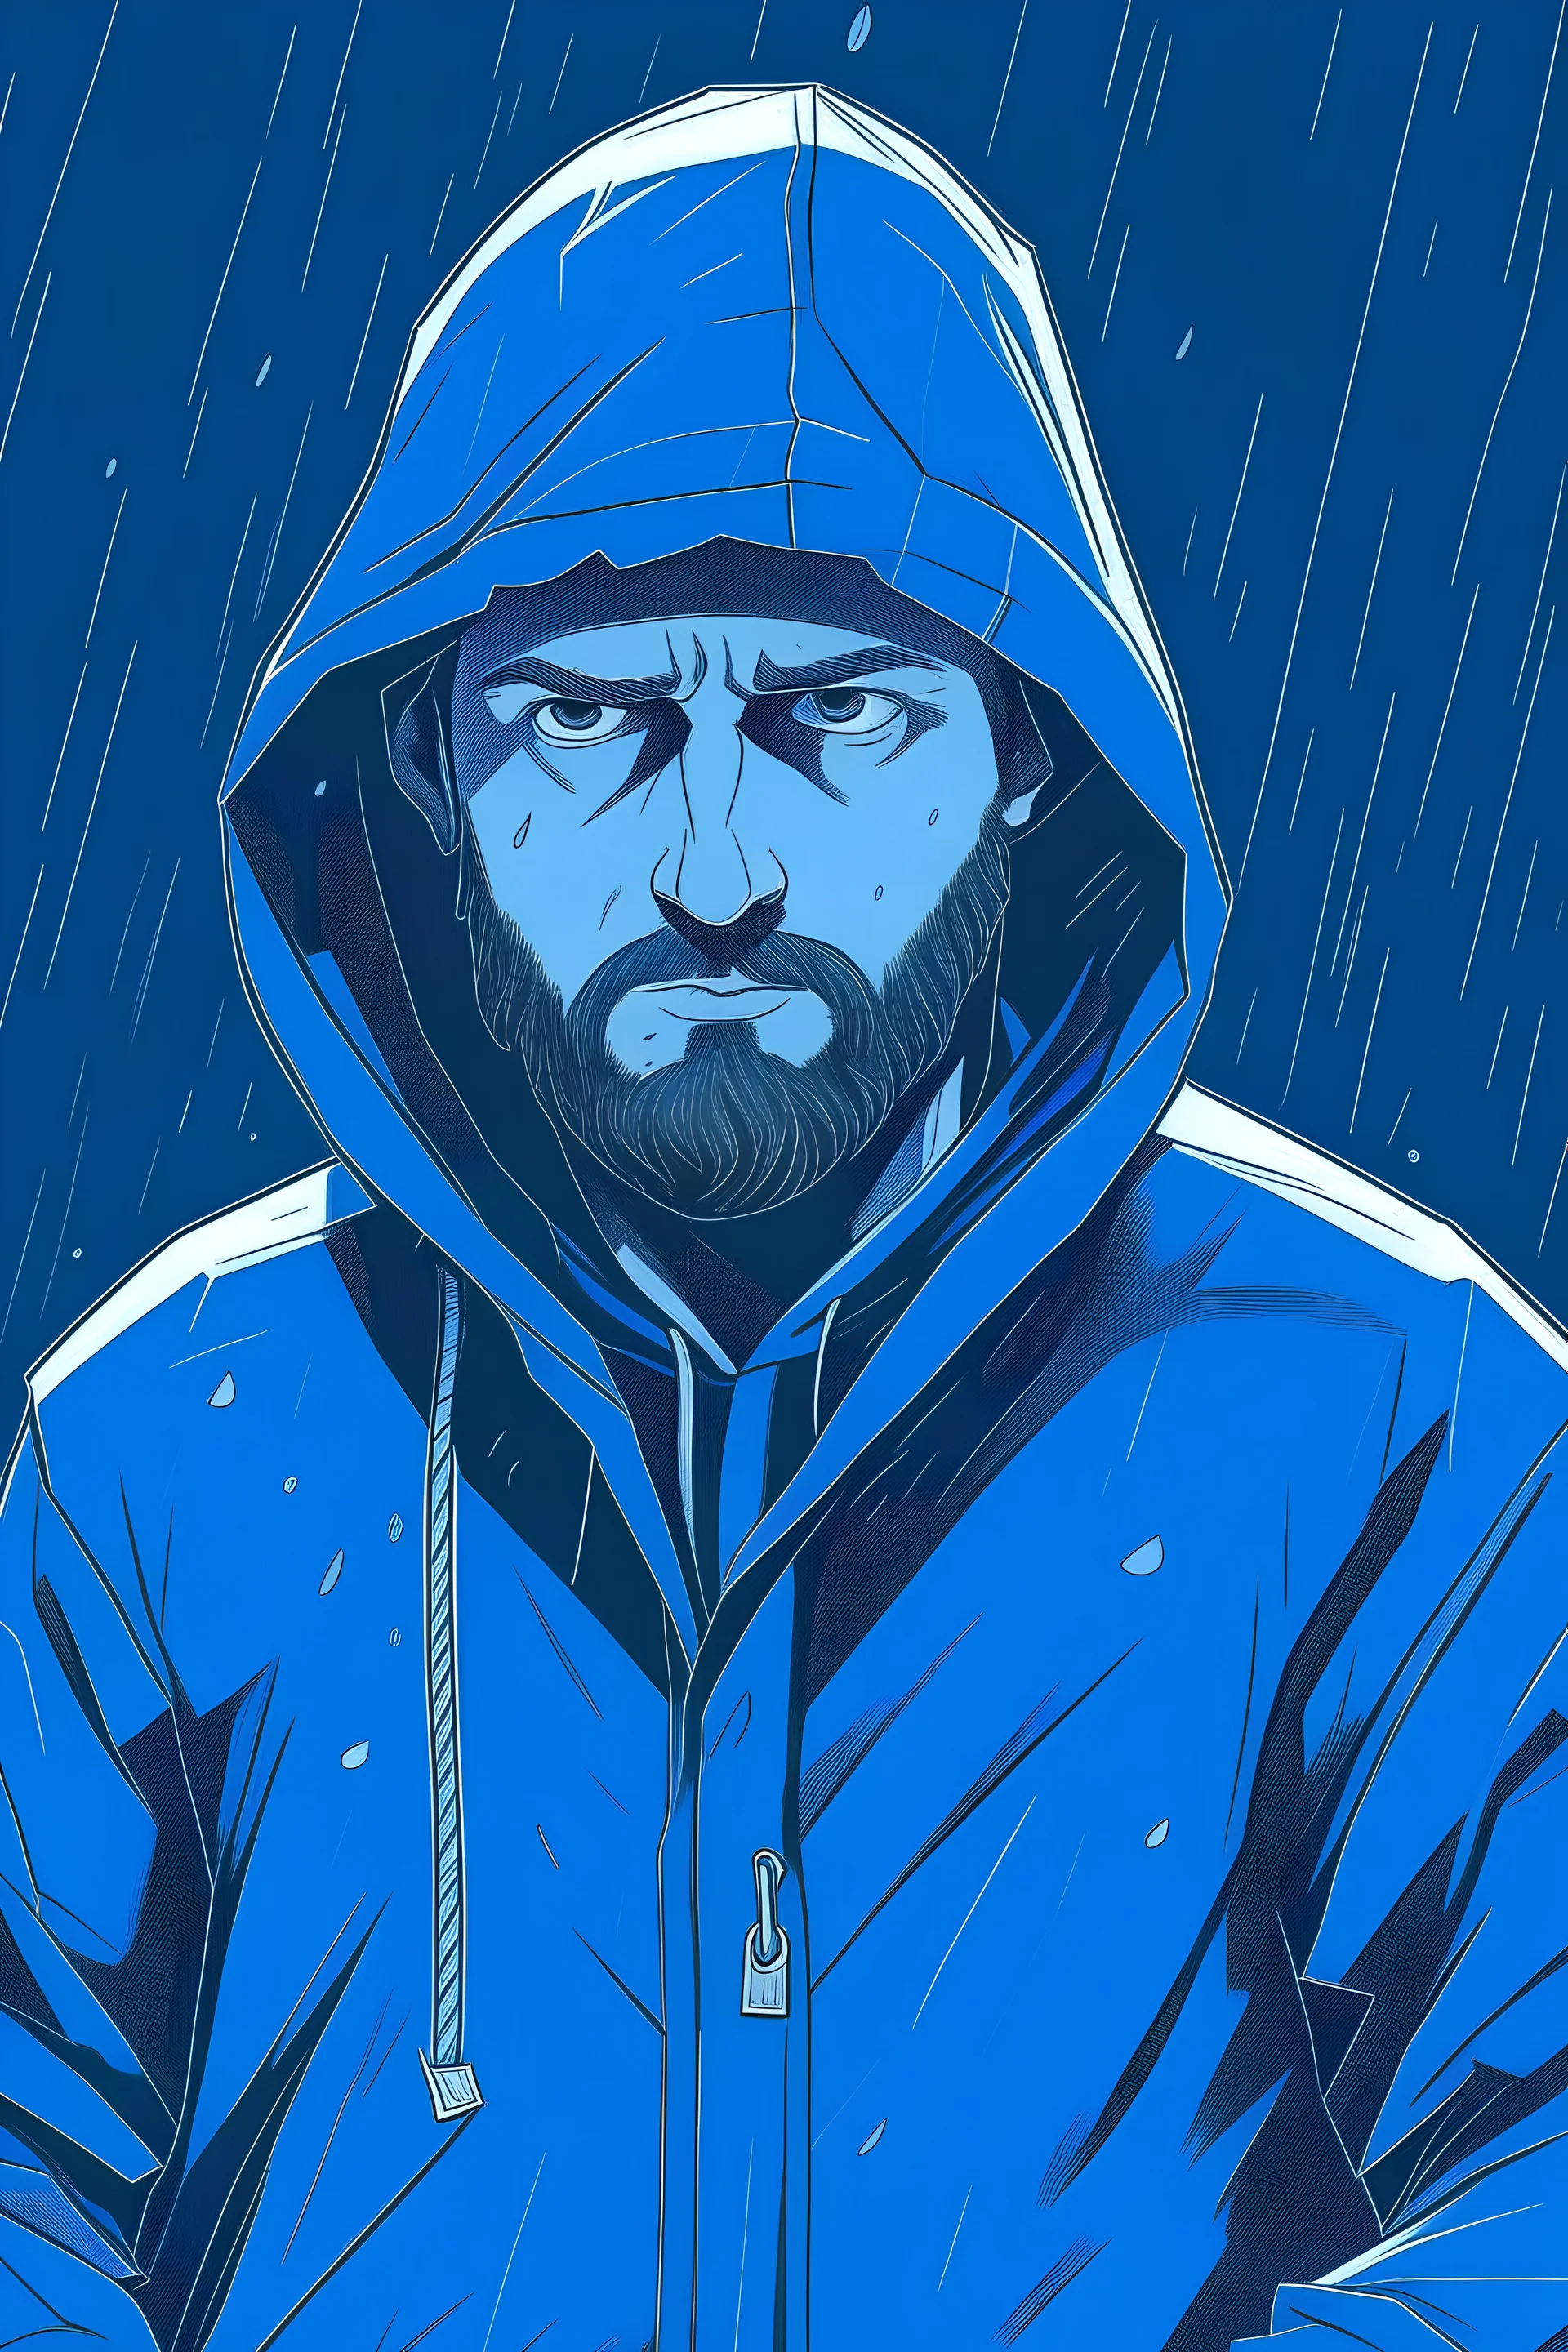 A person with short bearded wearing a dark blue hoodie of Celvin Klein. His head is covered by the hoodies cap, he puts his hands in his pockets and walking. the background is in blue color where one lightning has happened. he is wearing a blue handkerchief on his face.